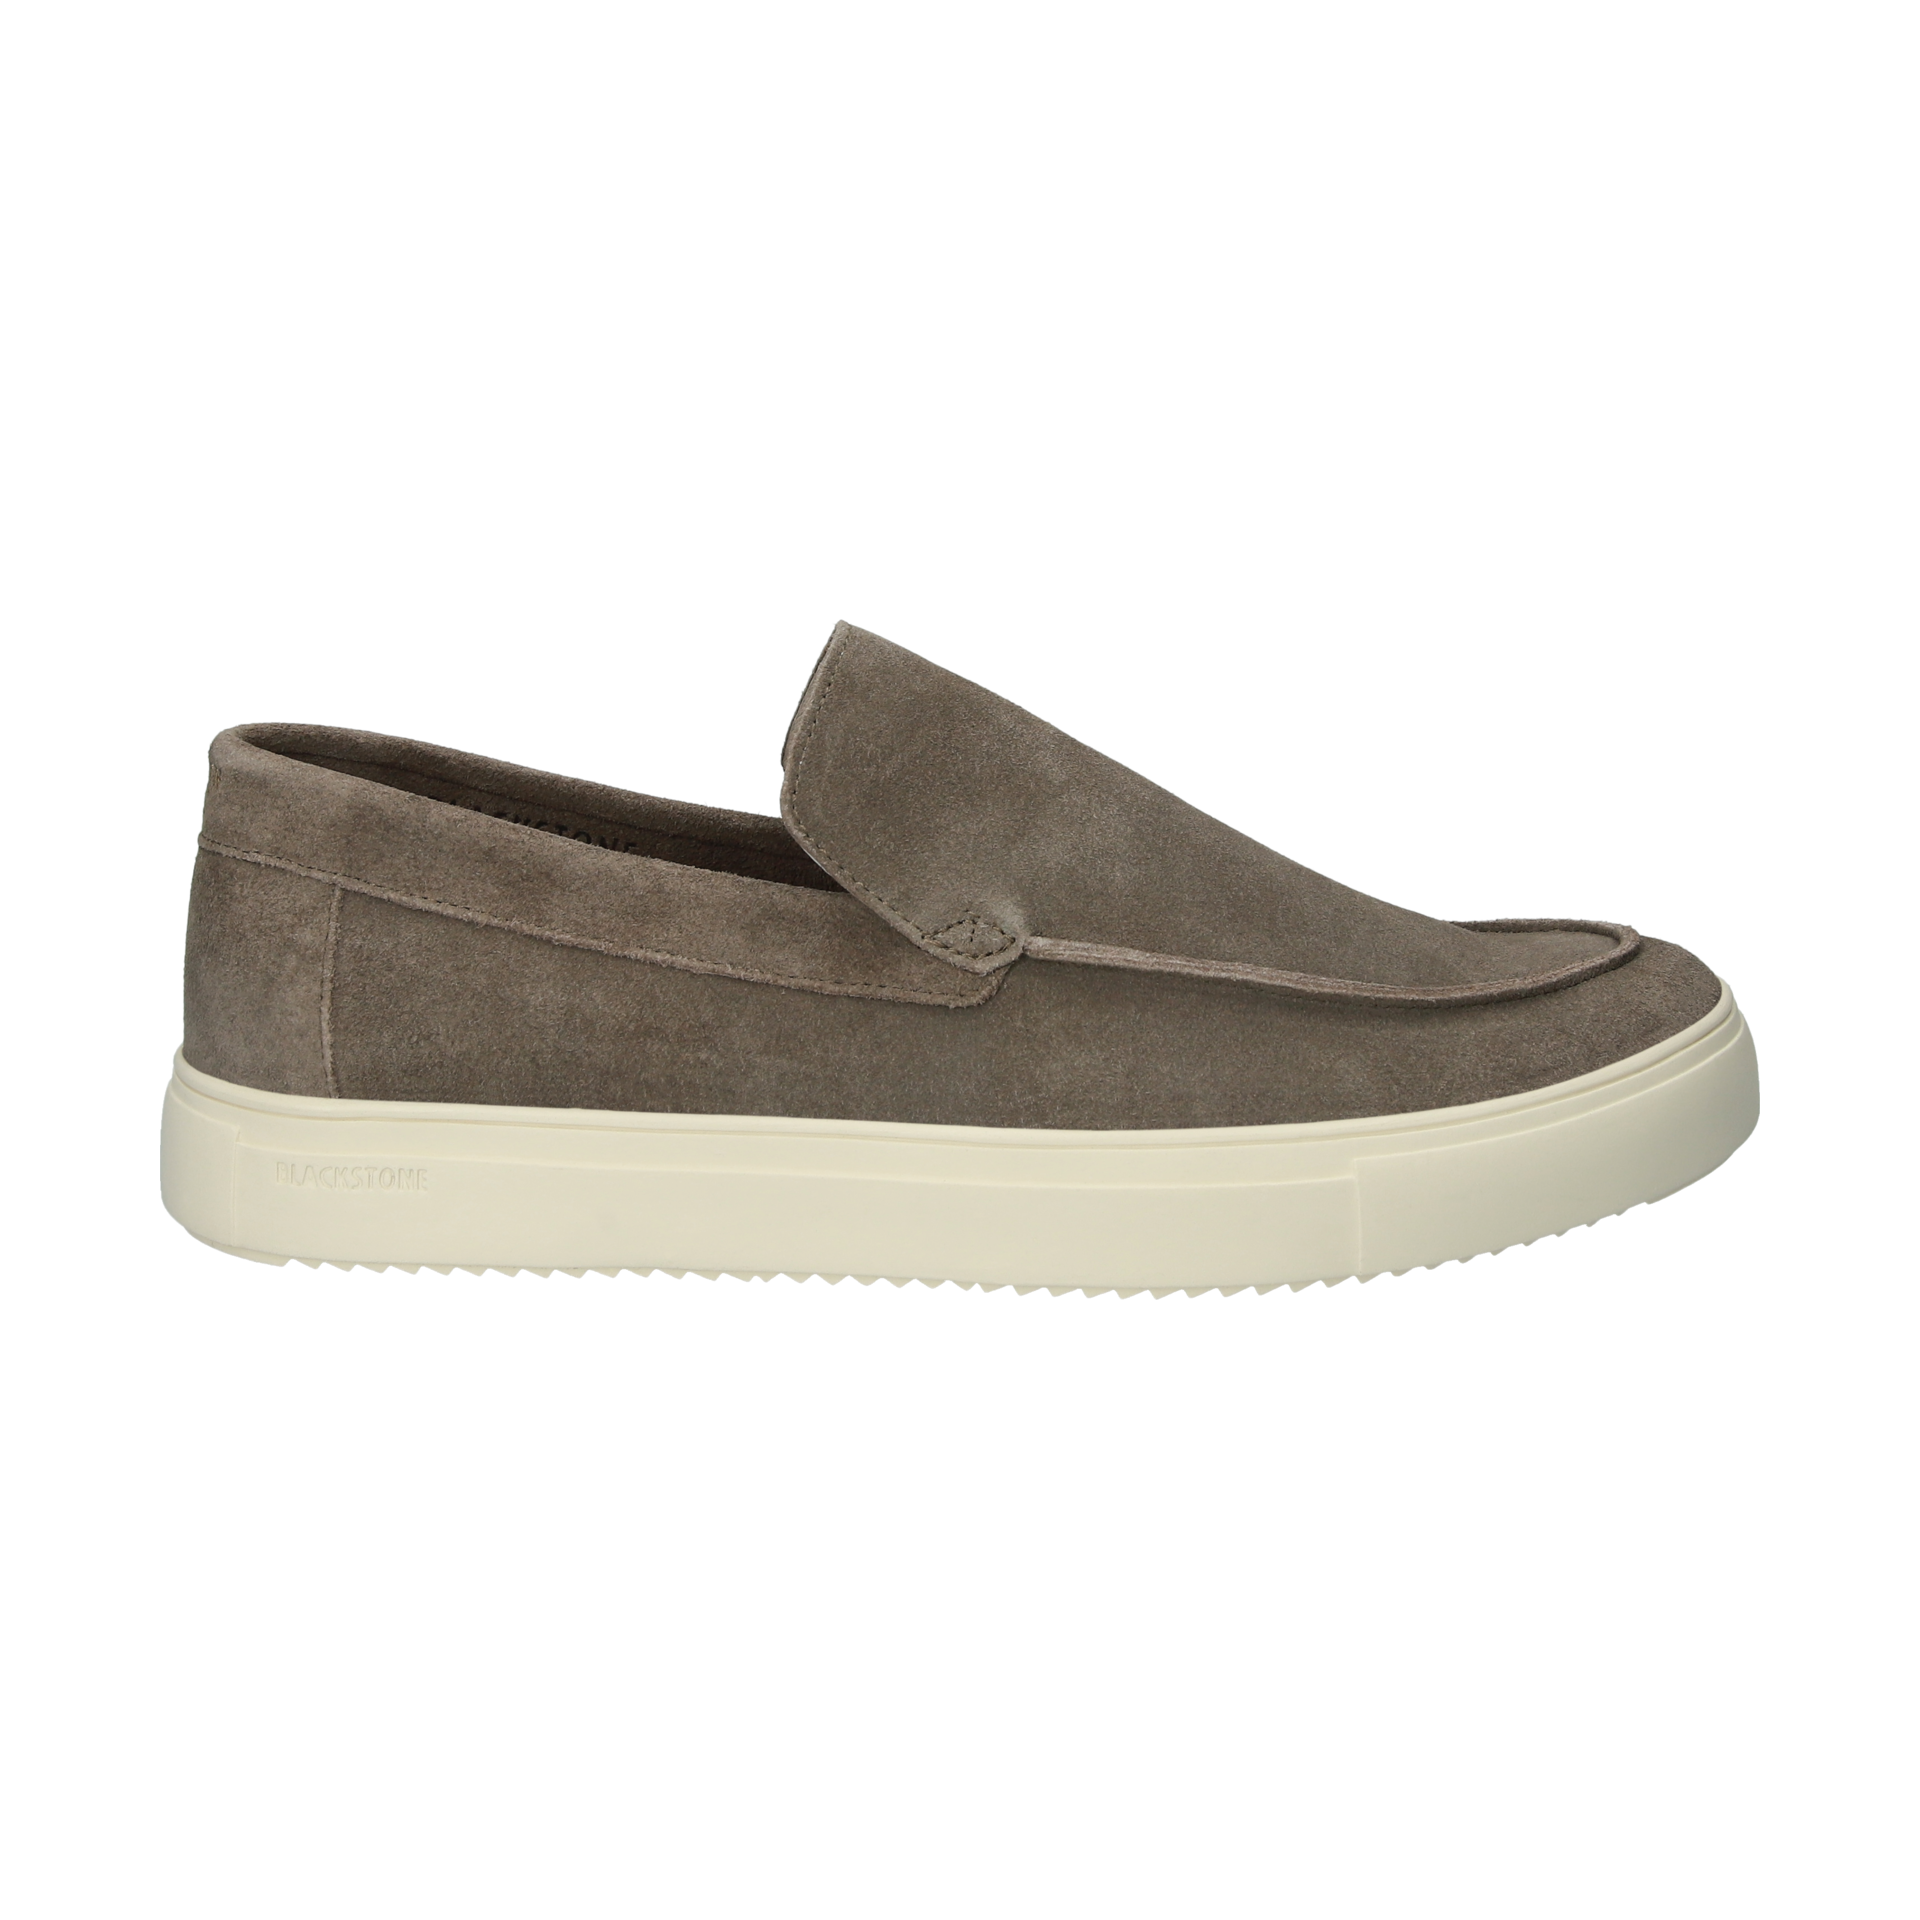 Slip On Shoes - Shop Comfortable Slip On Sneakers | ECCO®